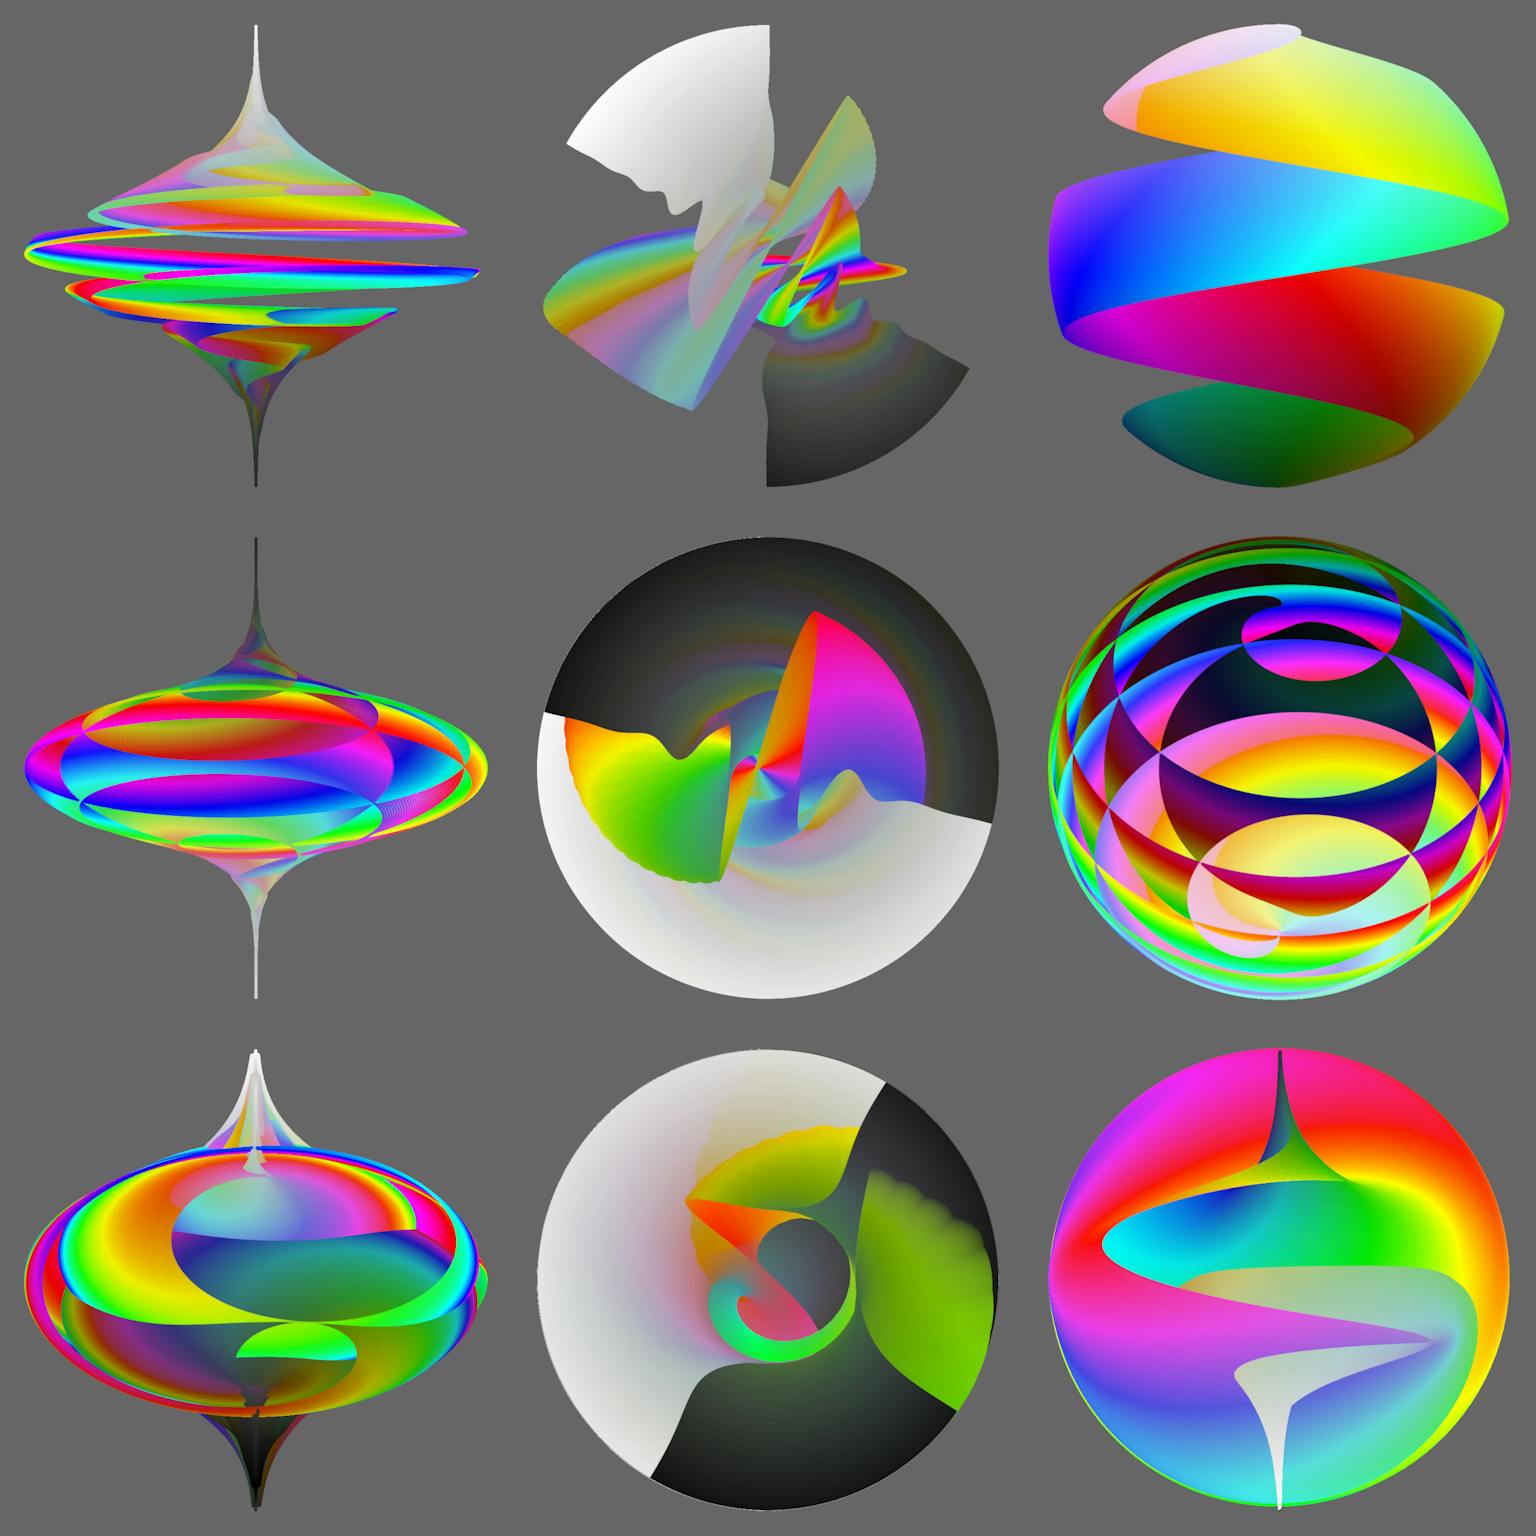 Image for entry 'Parametric sculptures in color space'